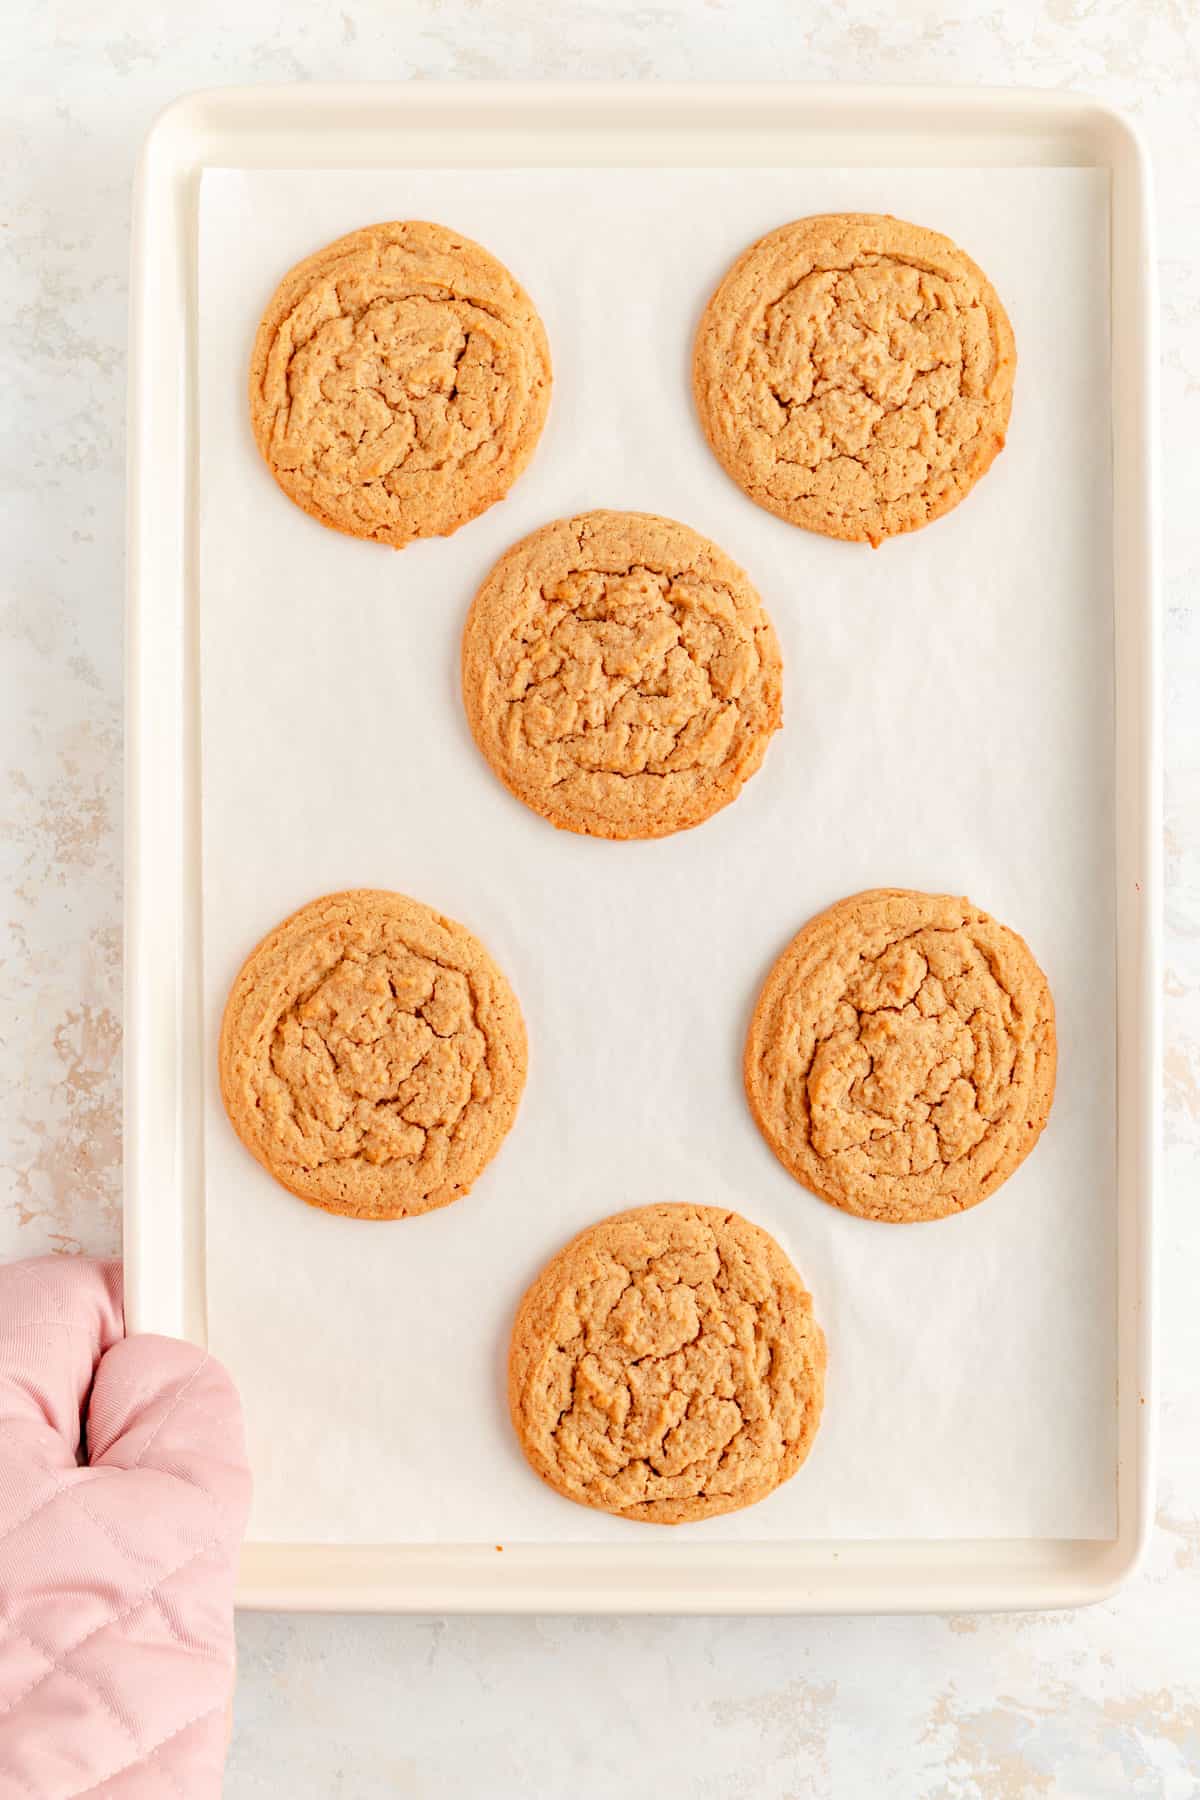 six plain baked peanut butter cookies spaced on a lined white baking sheet.